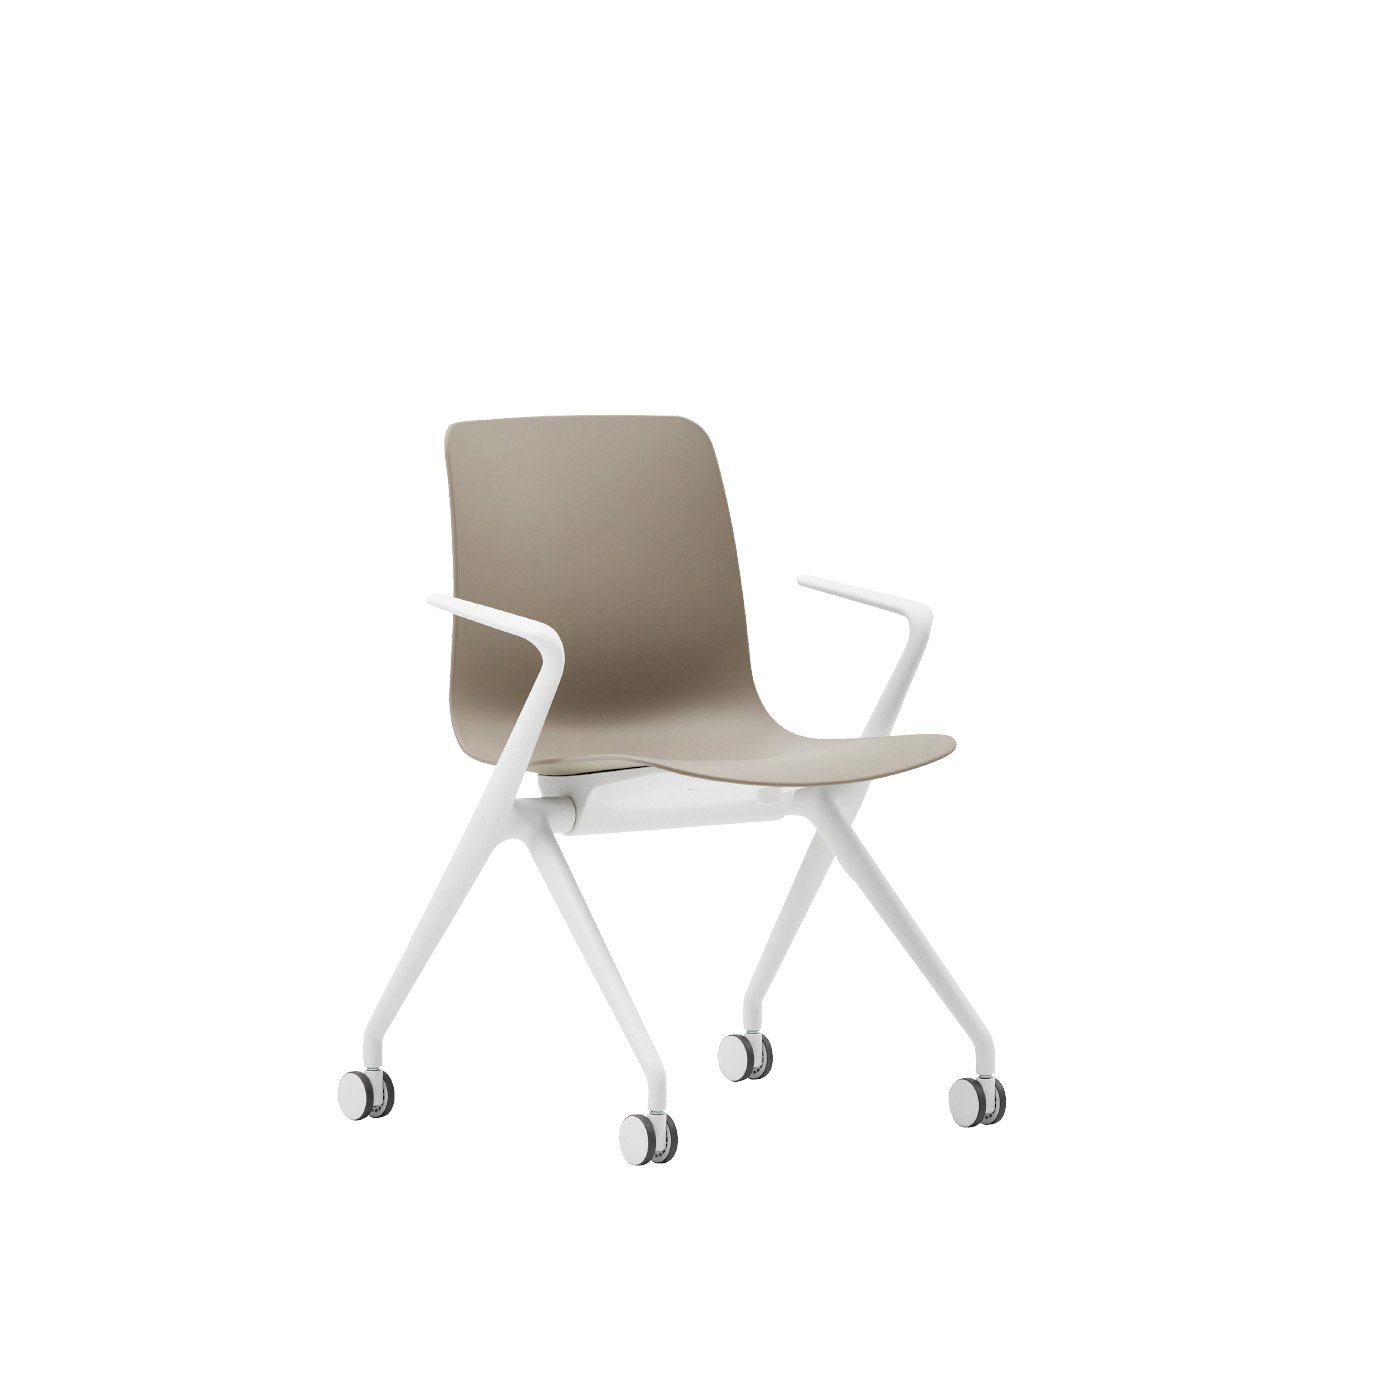 Haworth Bowi conference chair side angle